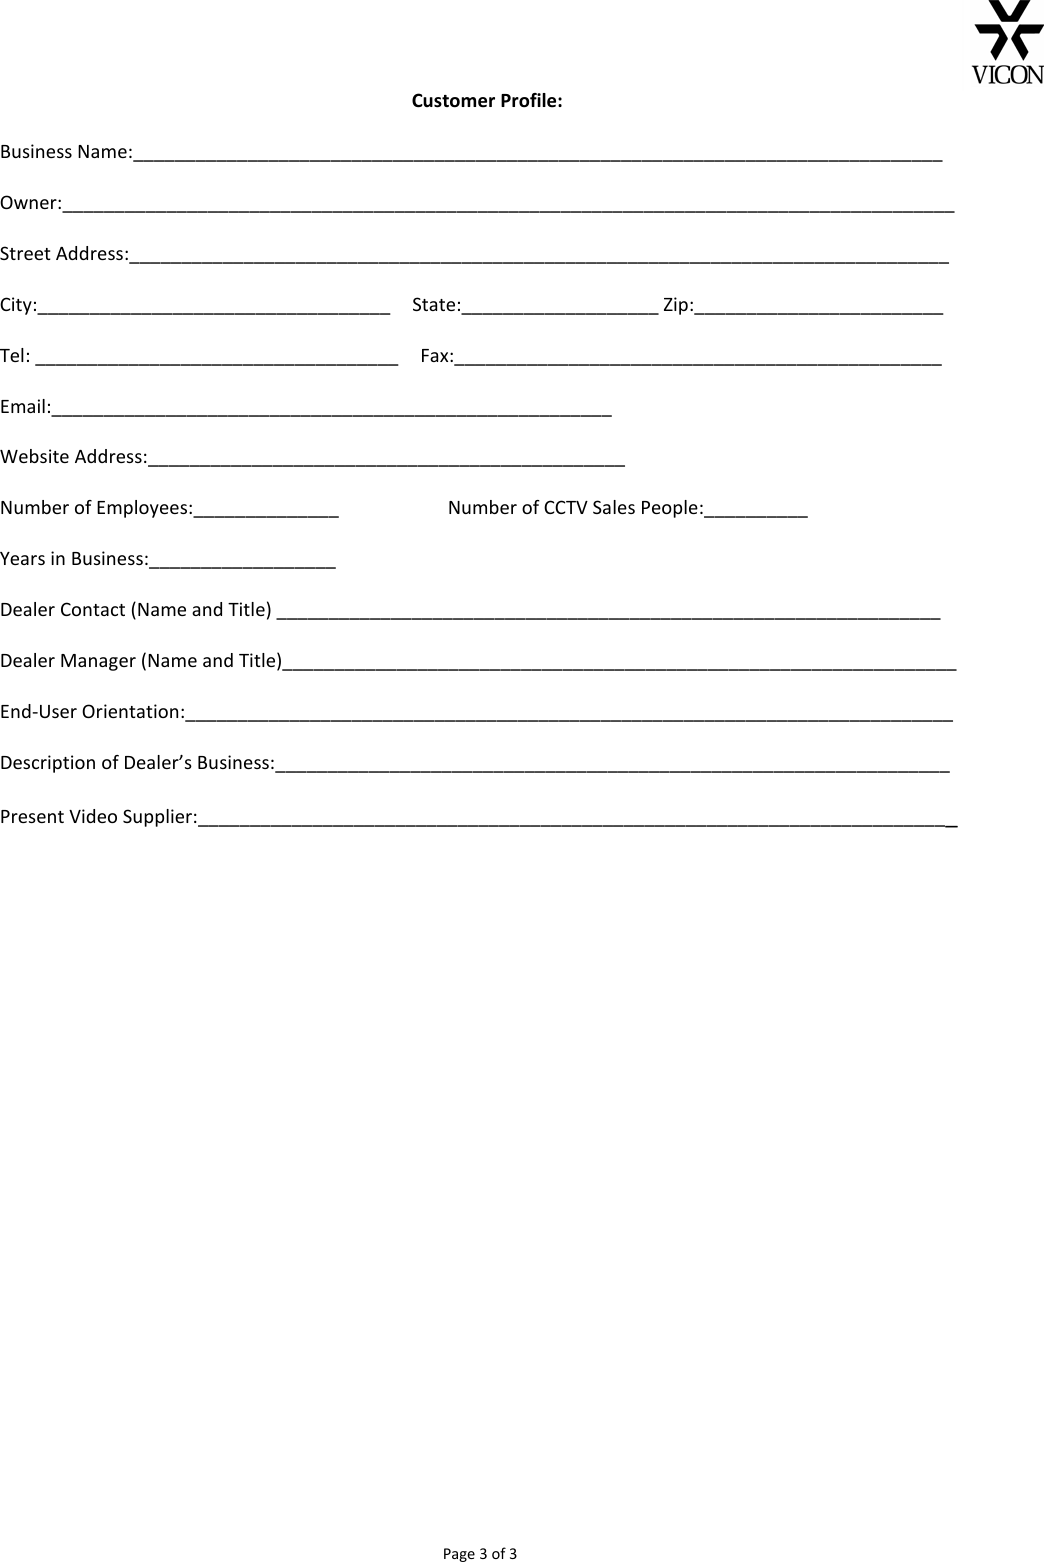 Page 3 of 3 - Security Newdealercreditapplicationform User Manual New Dealer Credit Application Form